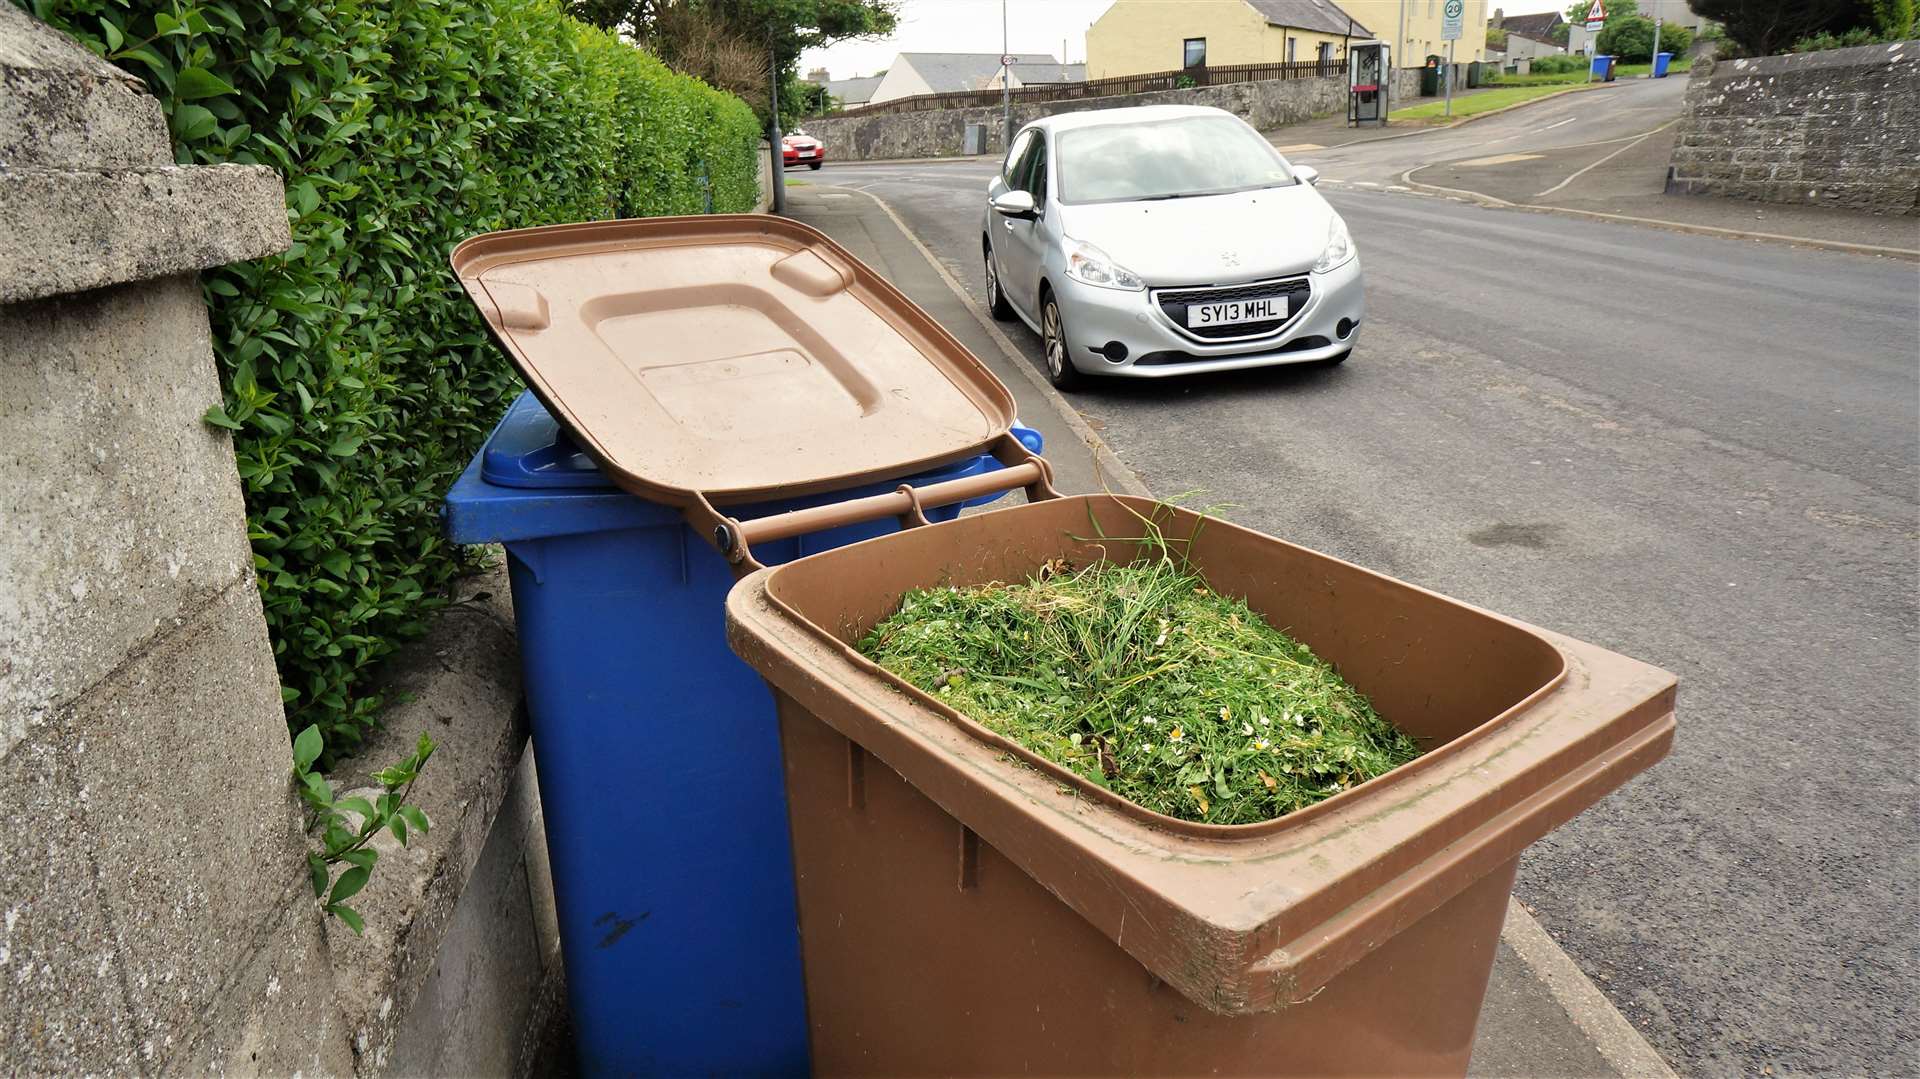 Garden waste permits are available online.